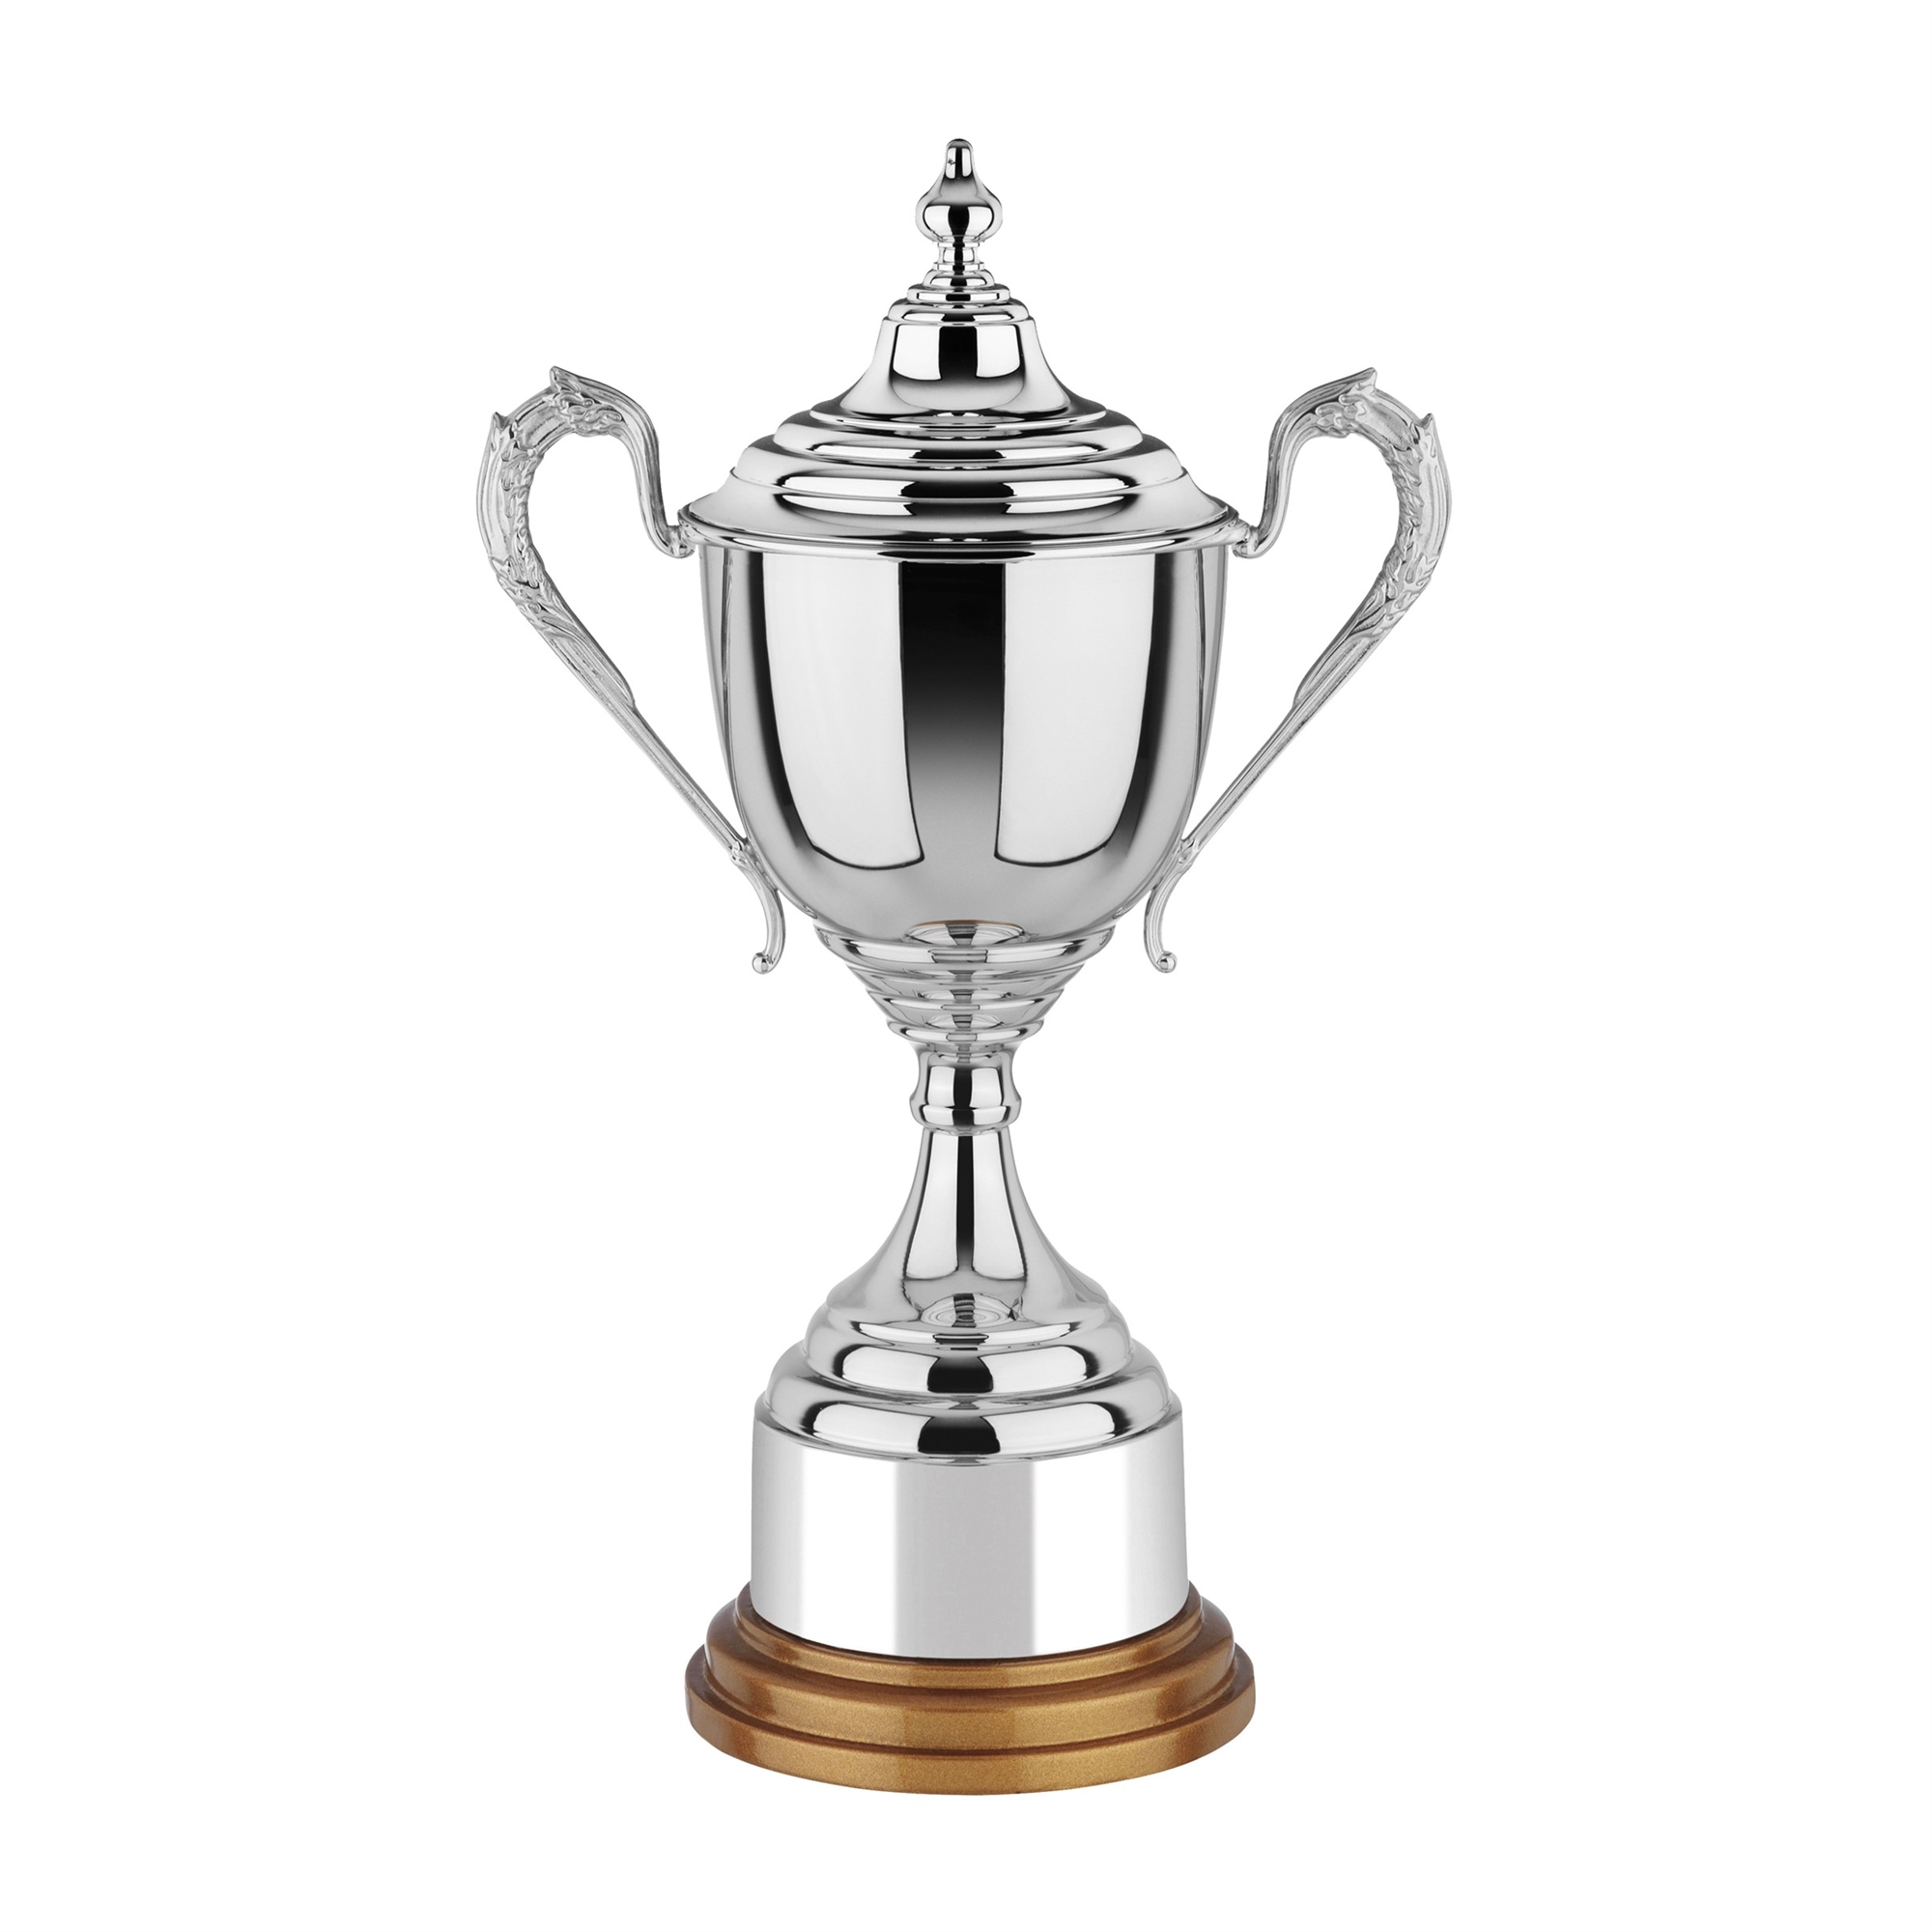 Revolution 1 Series Nickel Plated Cup with Lid on a Gold Finish Wooden Base - GWCSR1-6/SRL1